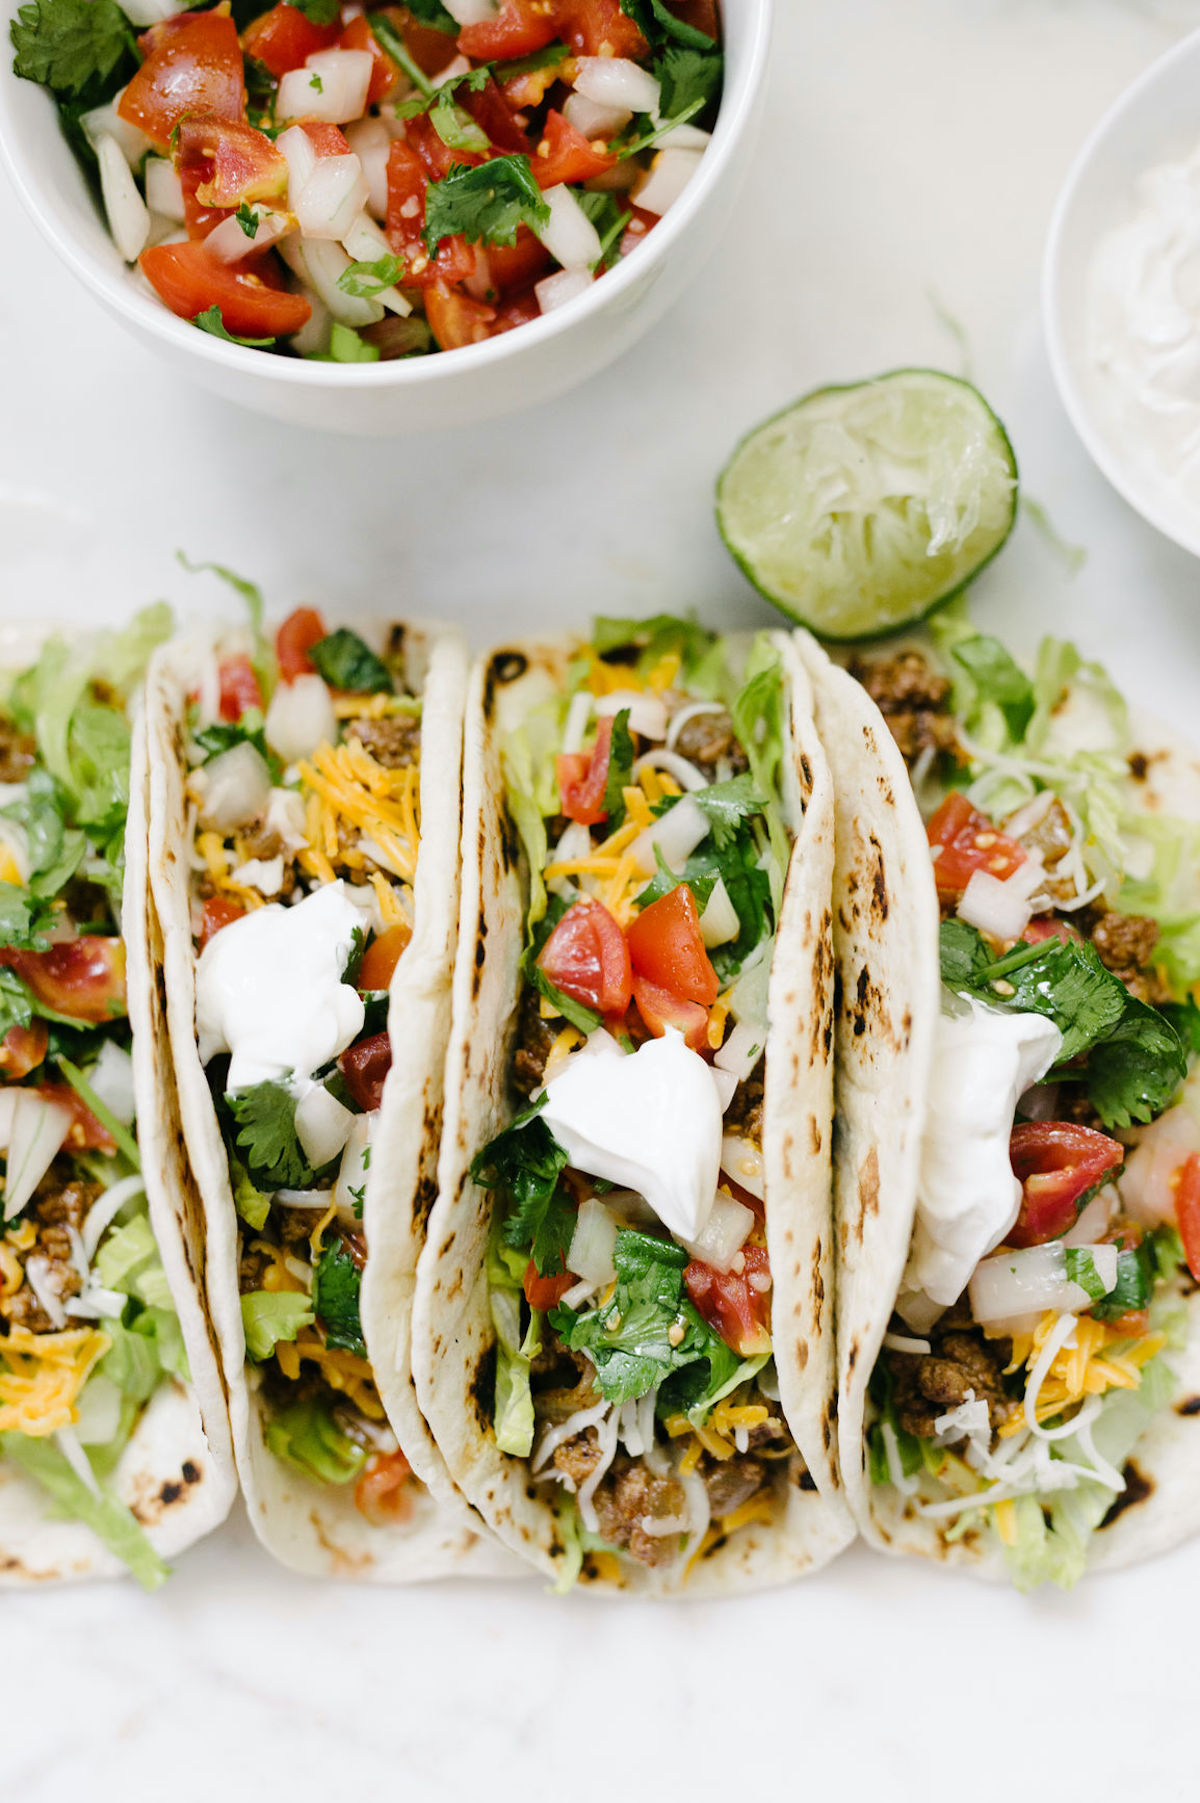 Top 10 Grilled Taco Fillings & Toppings